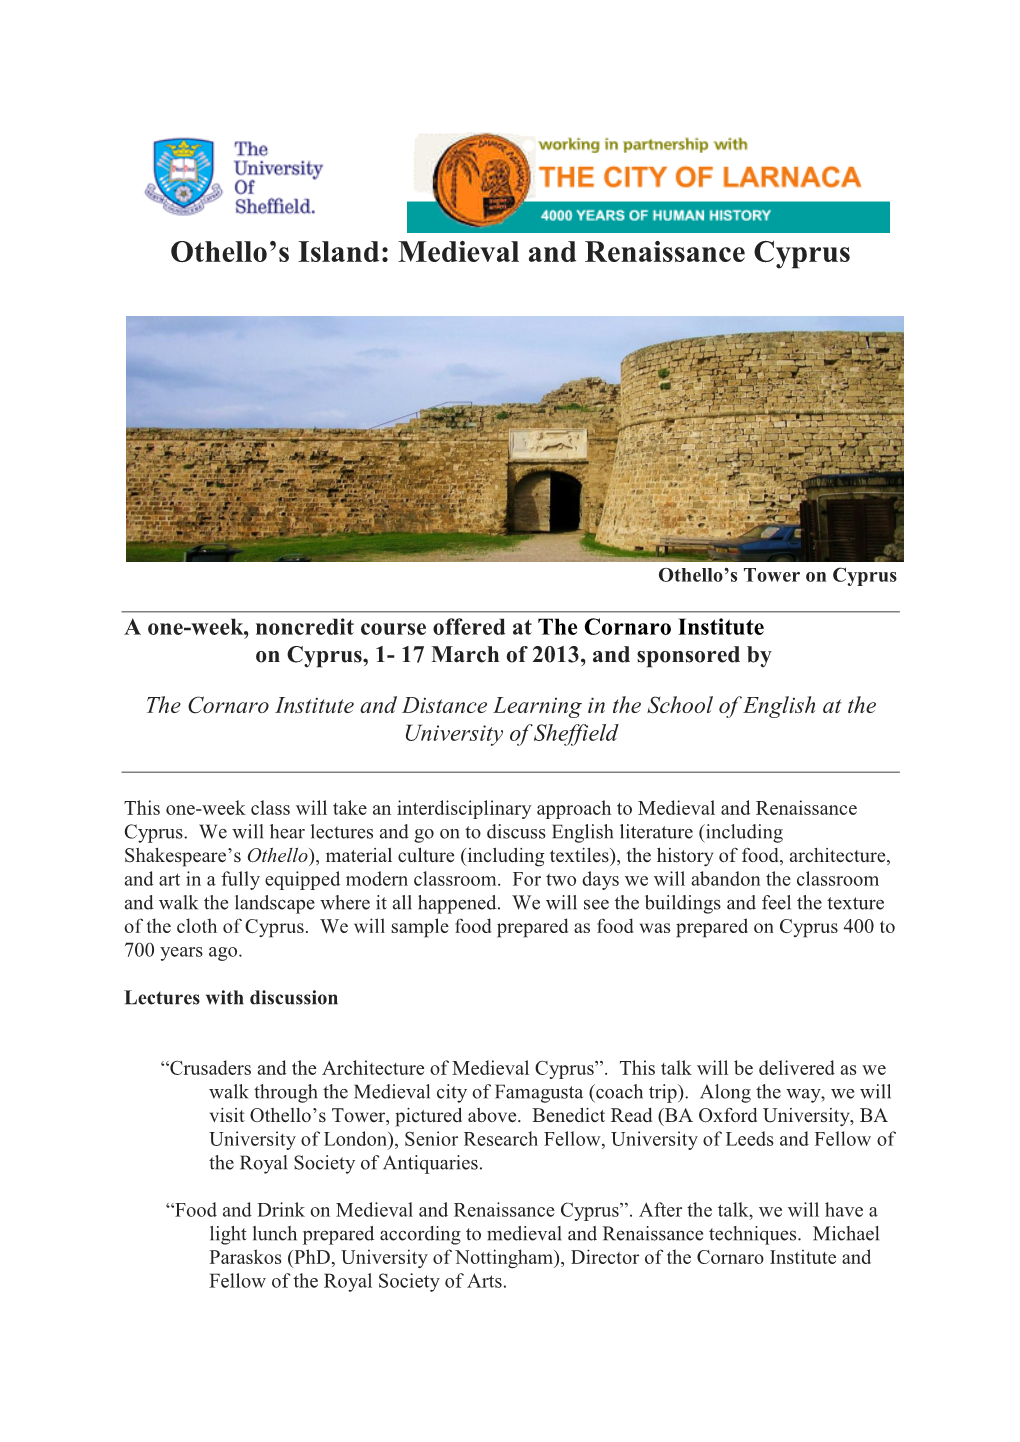 Medieval and Renaissance Cyprus